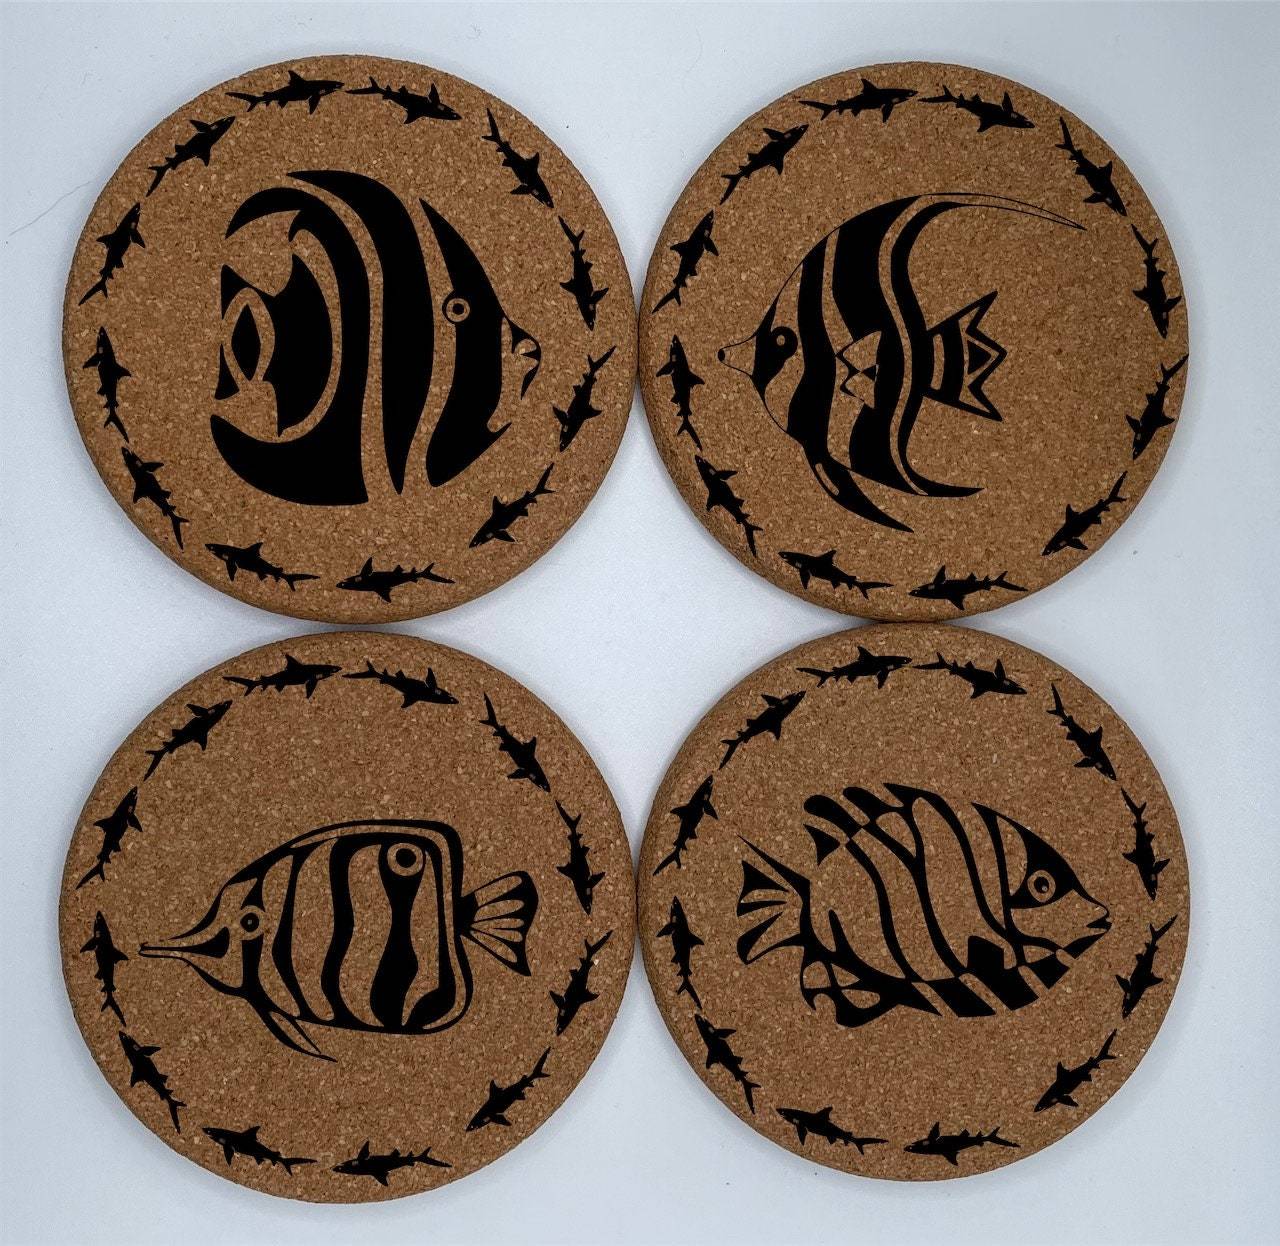 Ocean Fish Lover Coasters - Set of 4, Thick Cork, High-Temperature Resistant, Eco-Friendly